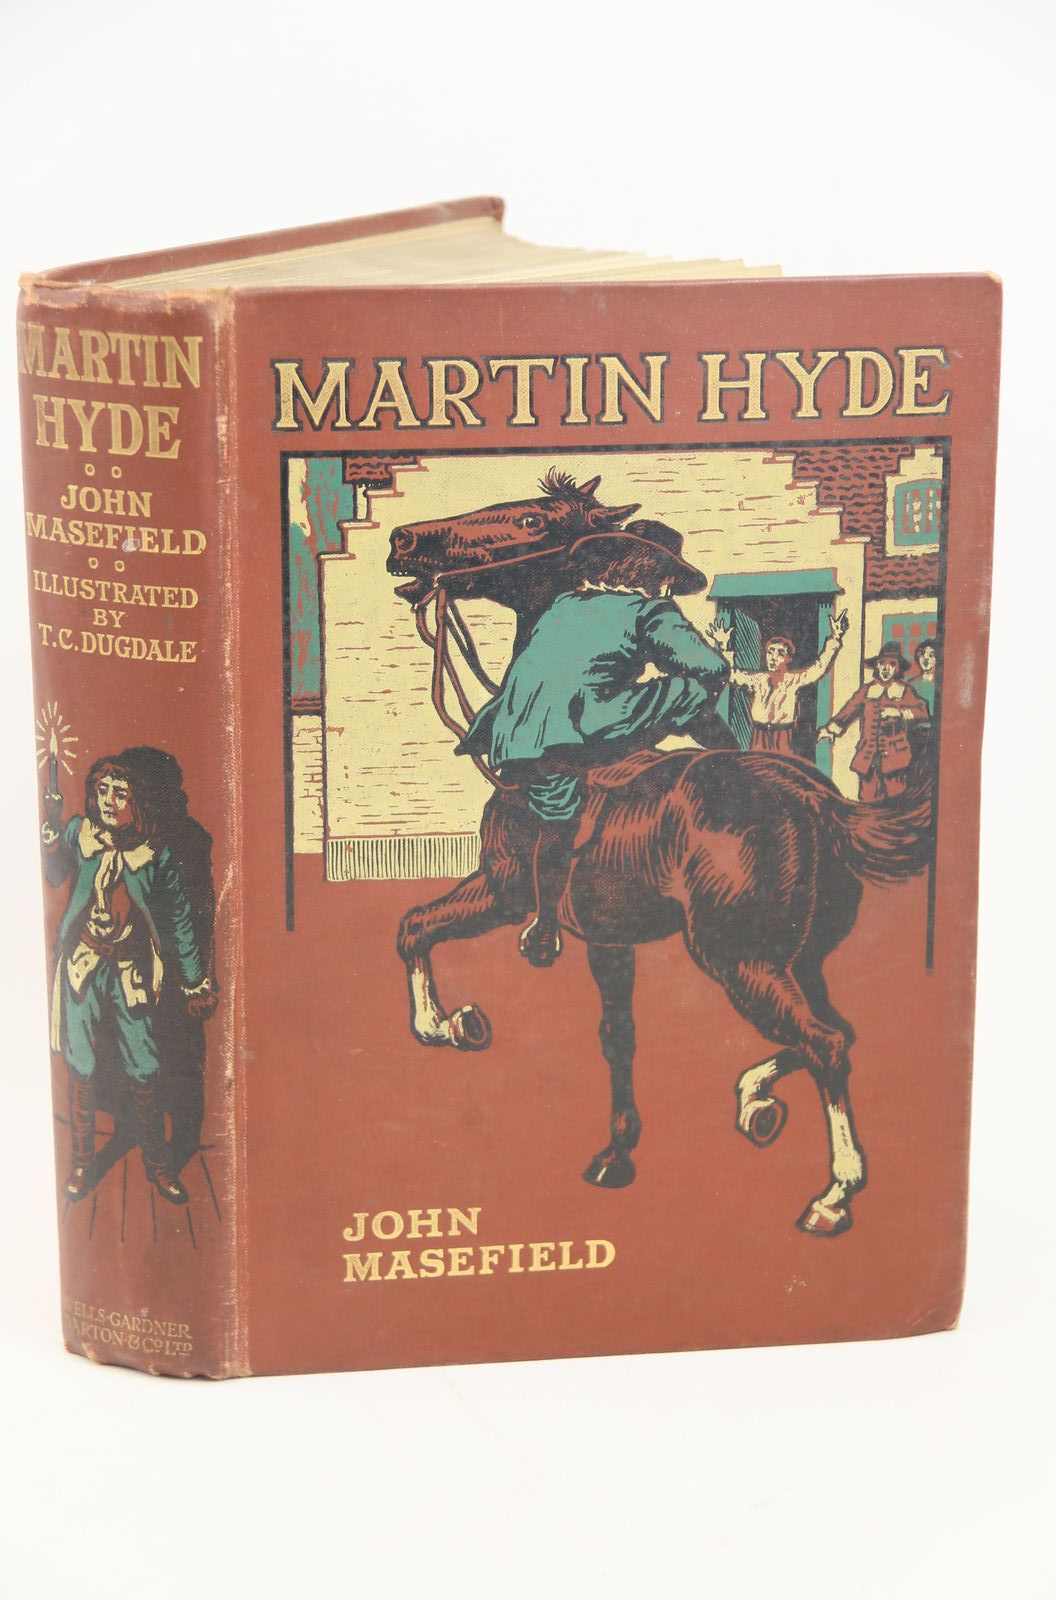 Photo of MARTIN HYDE written by Masefield, John illustrated by Dugdale, T.C. published by Wells Gardner, Darton &amp; Co. Ltd. (STOCK CODE: 1317878)  for sale by Stella & Rose's Books